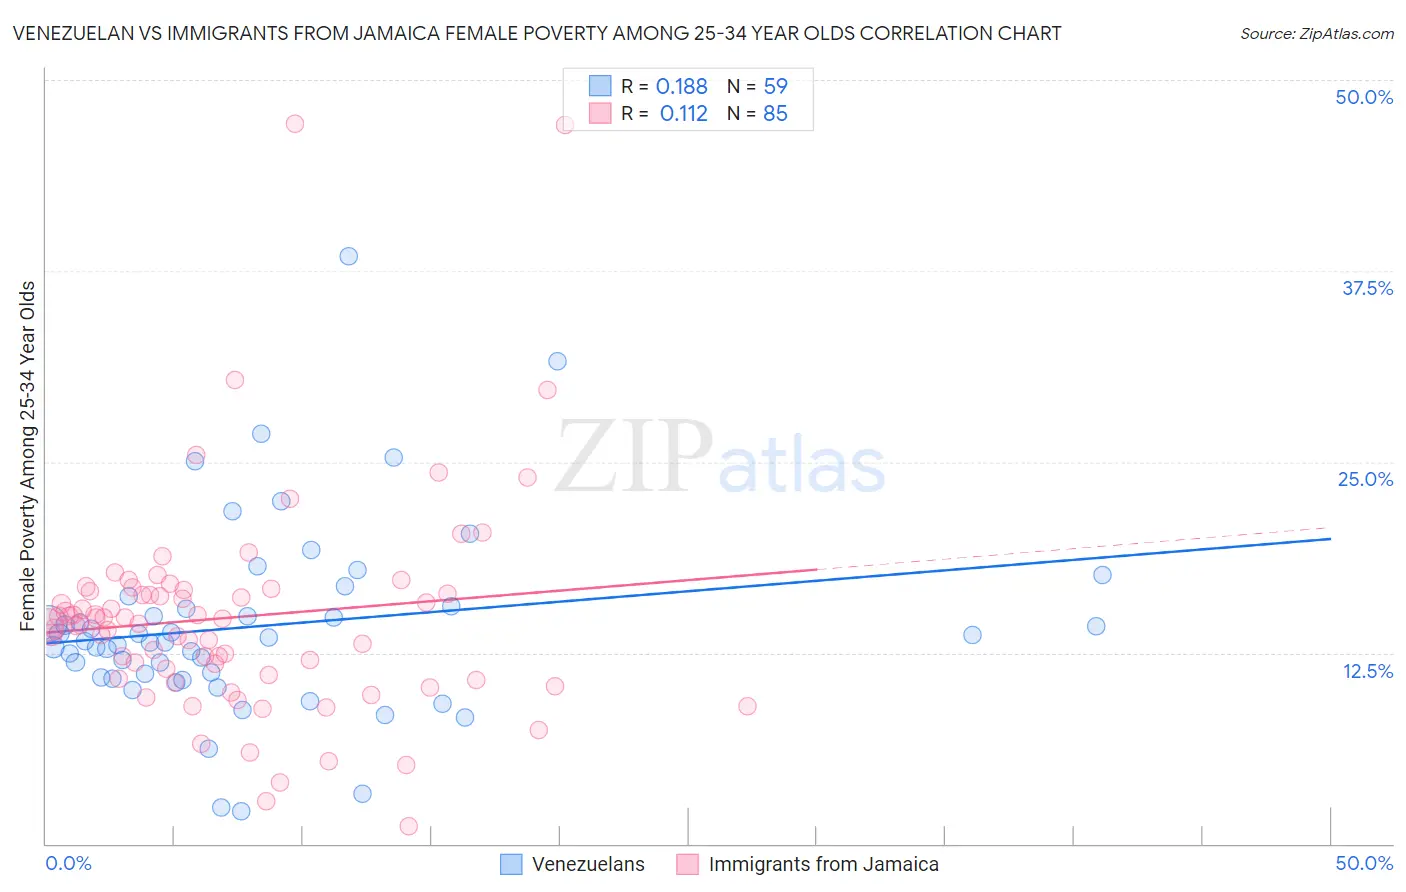 Venezuelan vs Immigrants from Jamaica Female Poverty Among 25-34 Year Olds